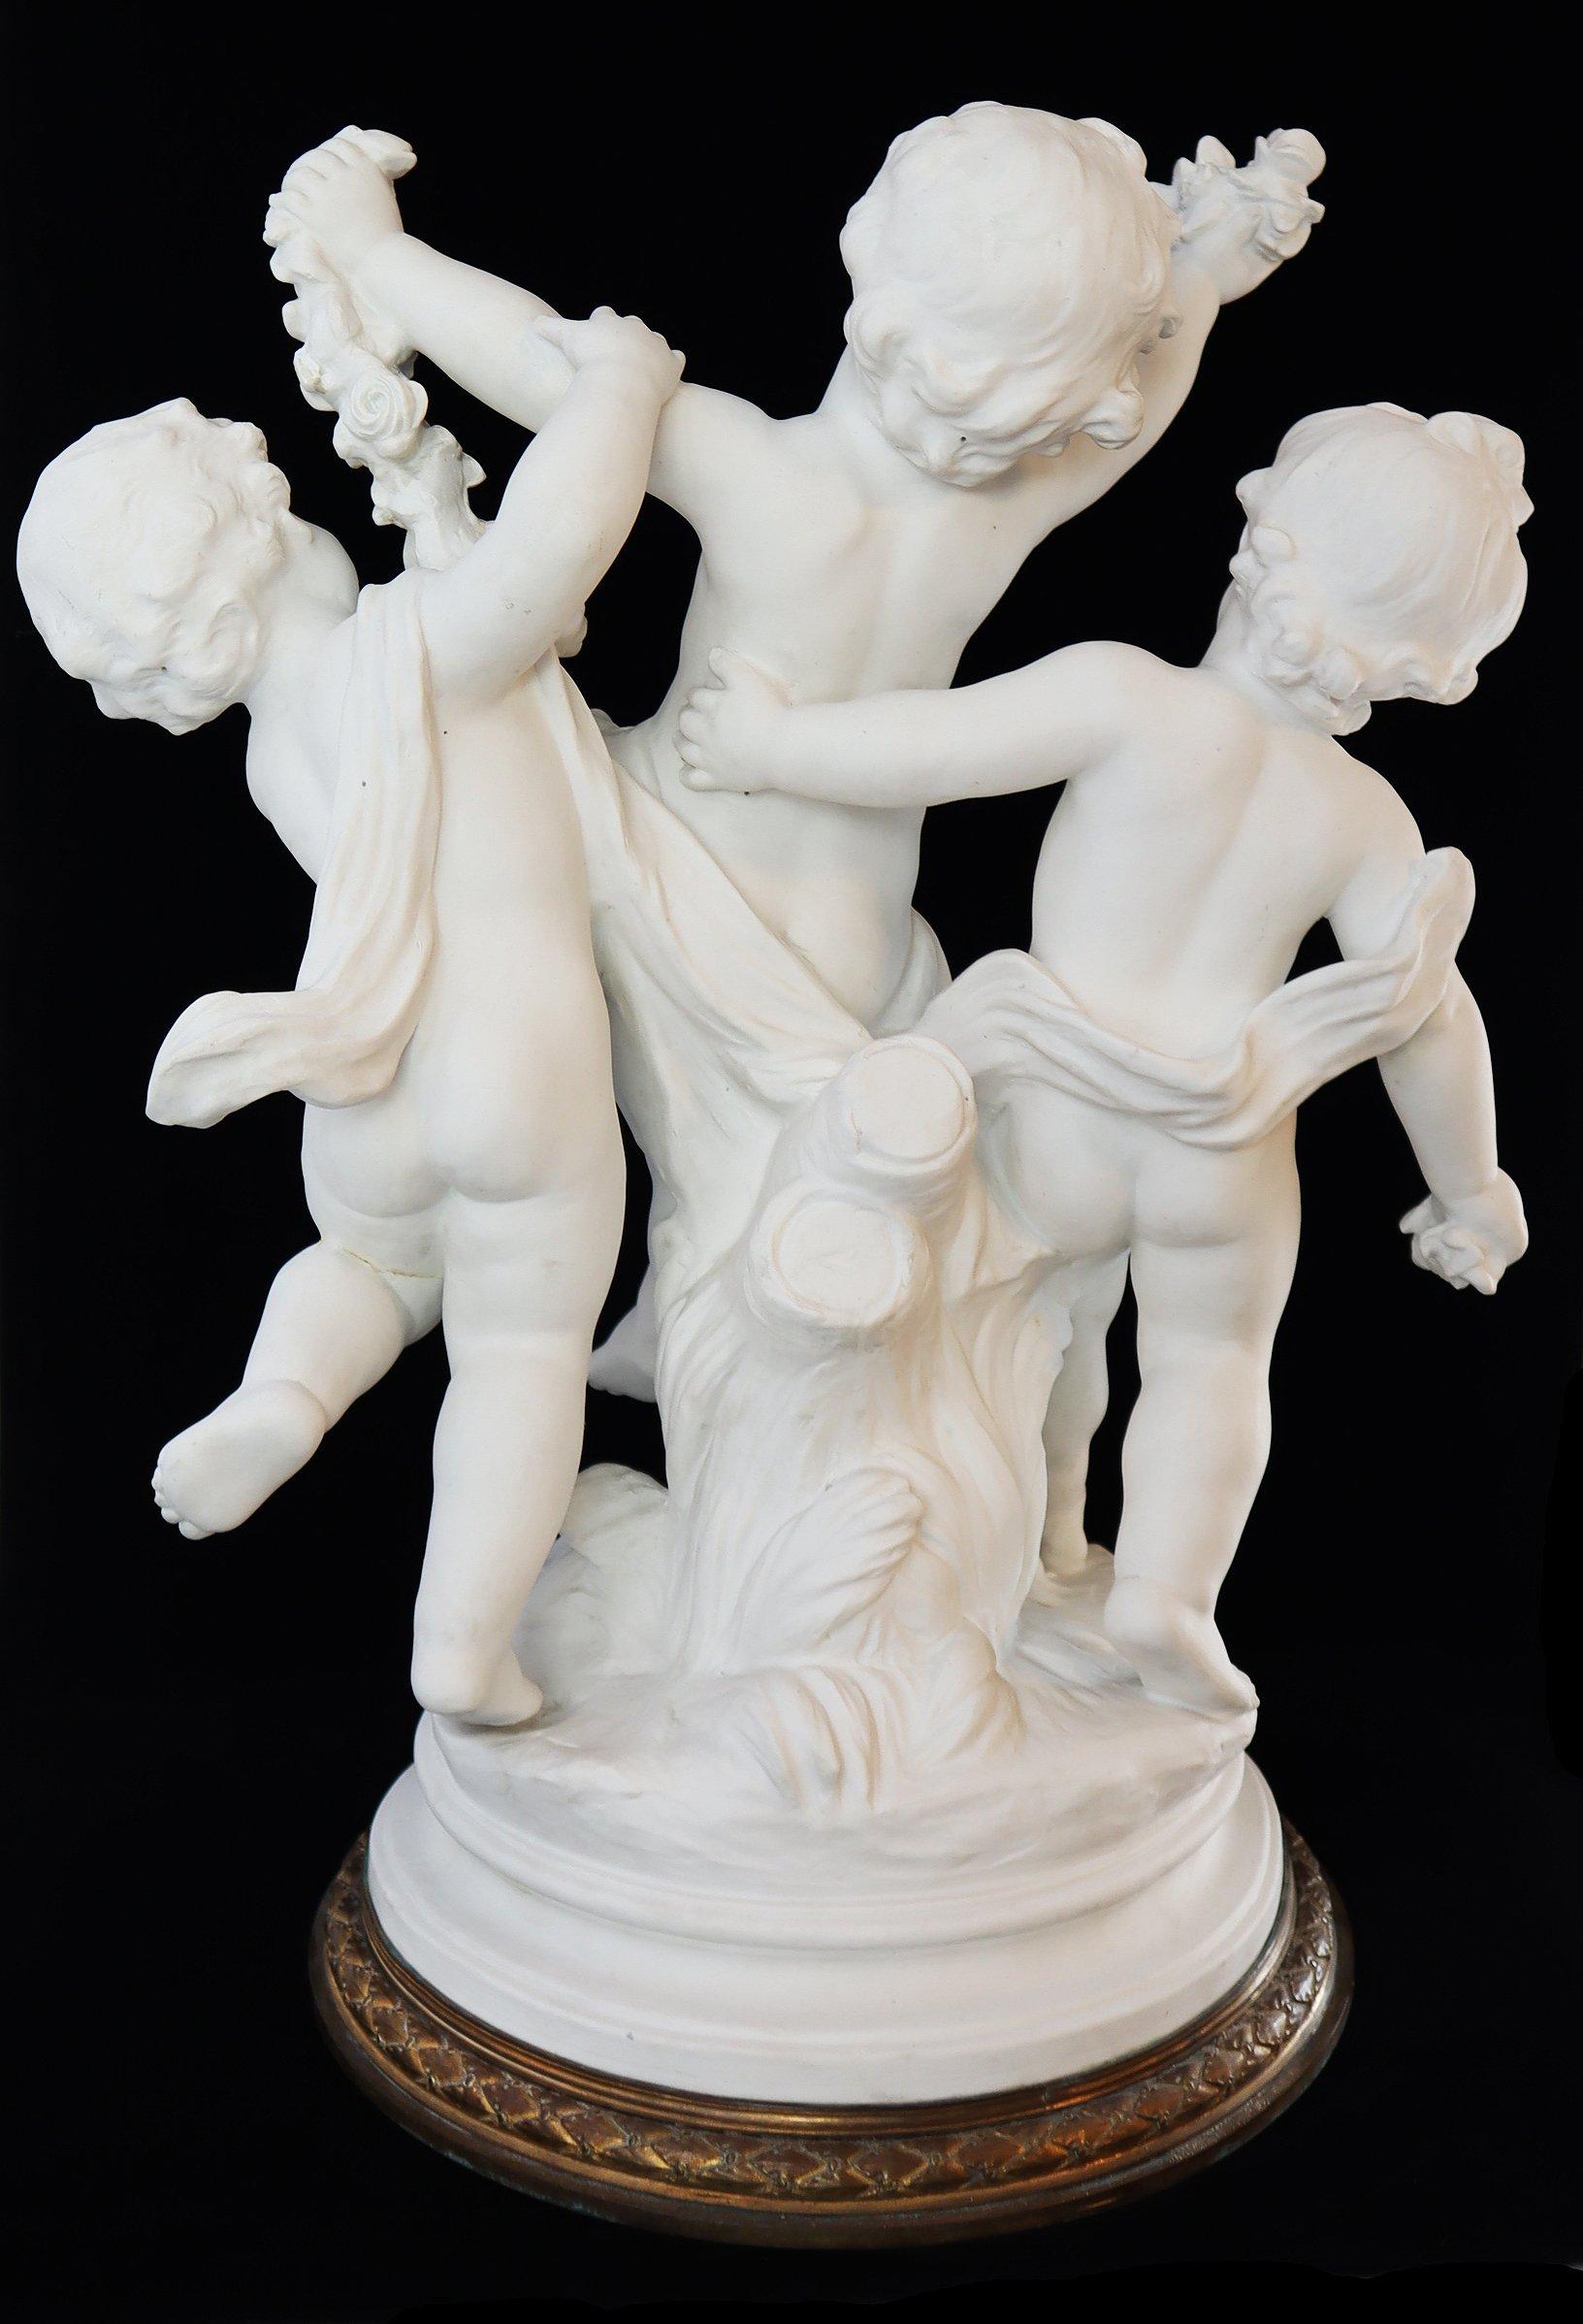 A 19th century French sculpture depicting a group of three putti dancing and playing with flower garlands (Louis XV style), placed on a round gilded bronze base, adorned with a fret of laurel leaves. Modeled after Ferdinando Vichy (1875-1945).